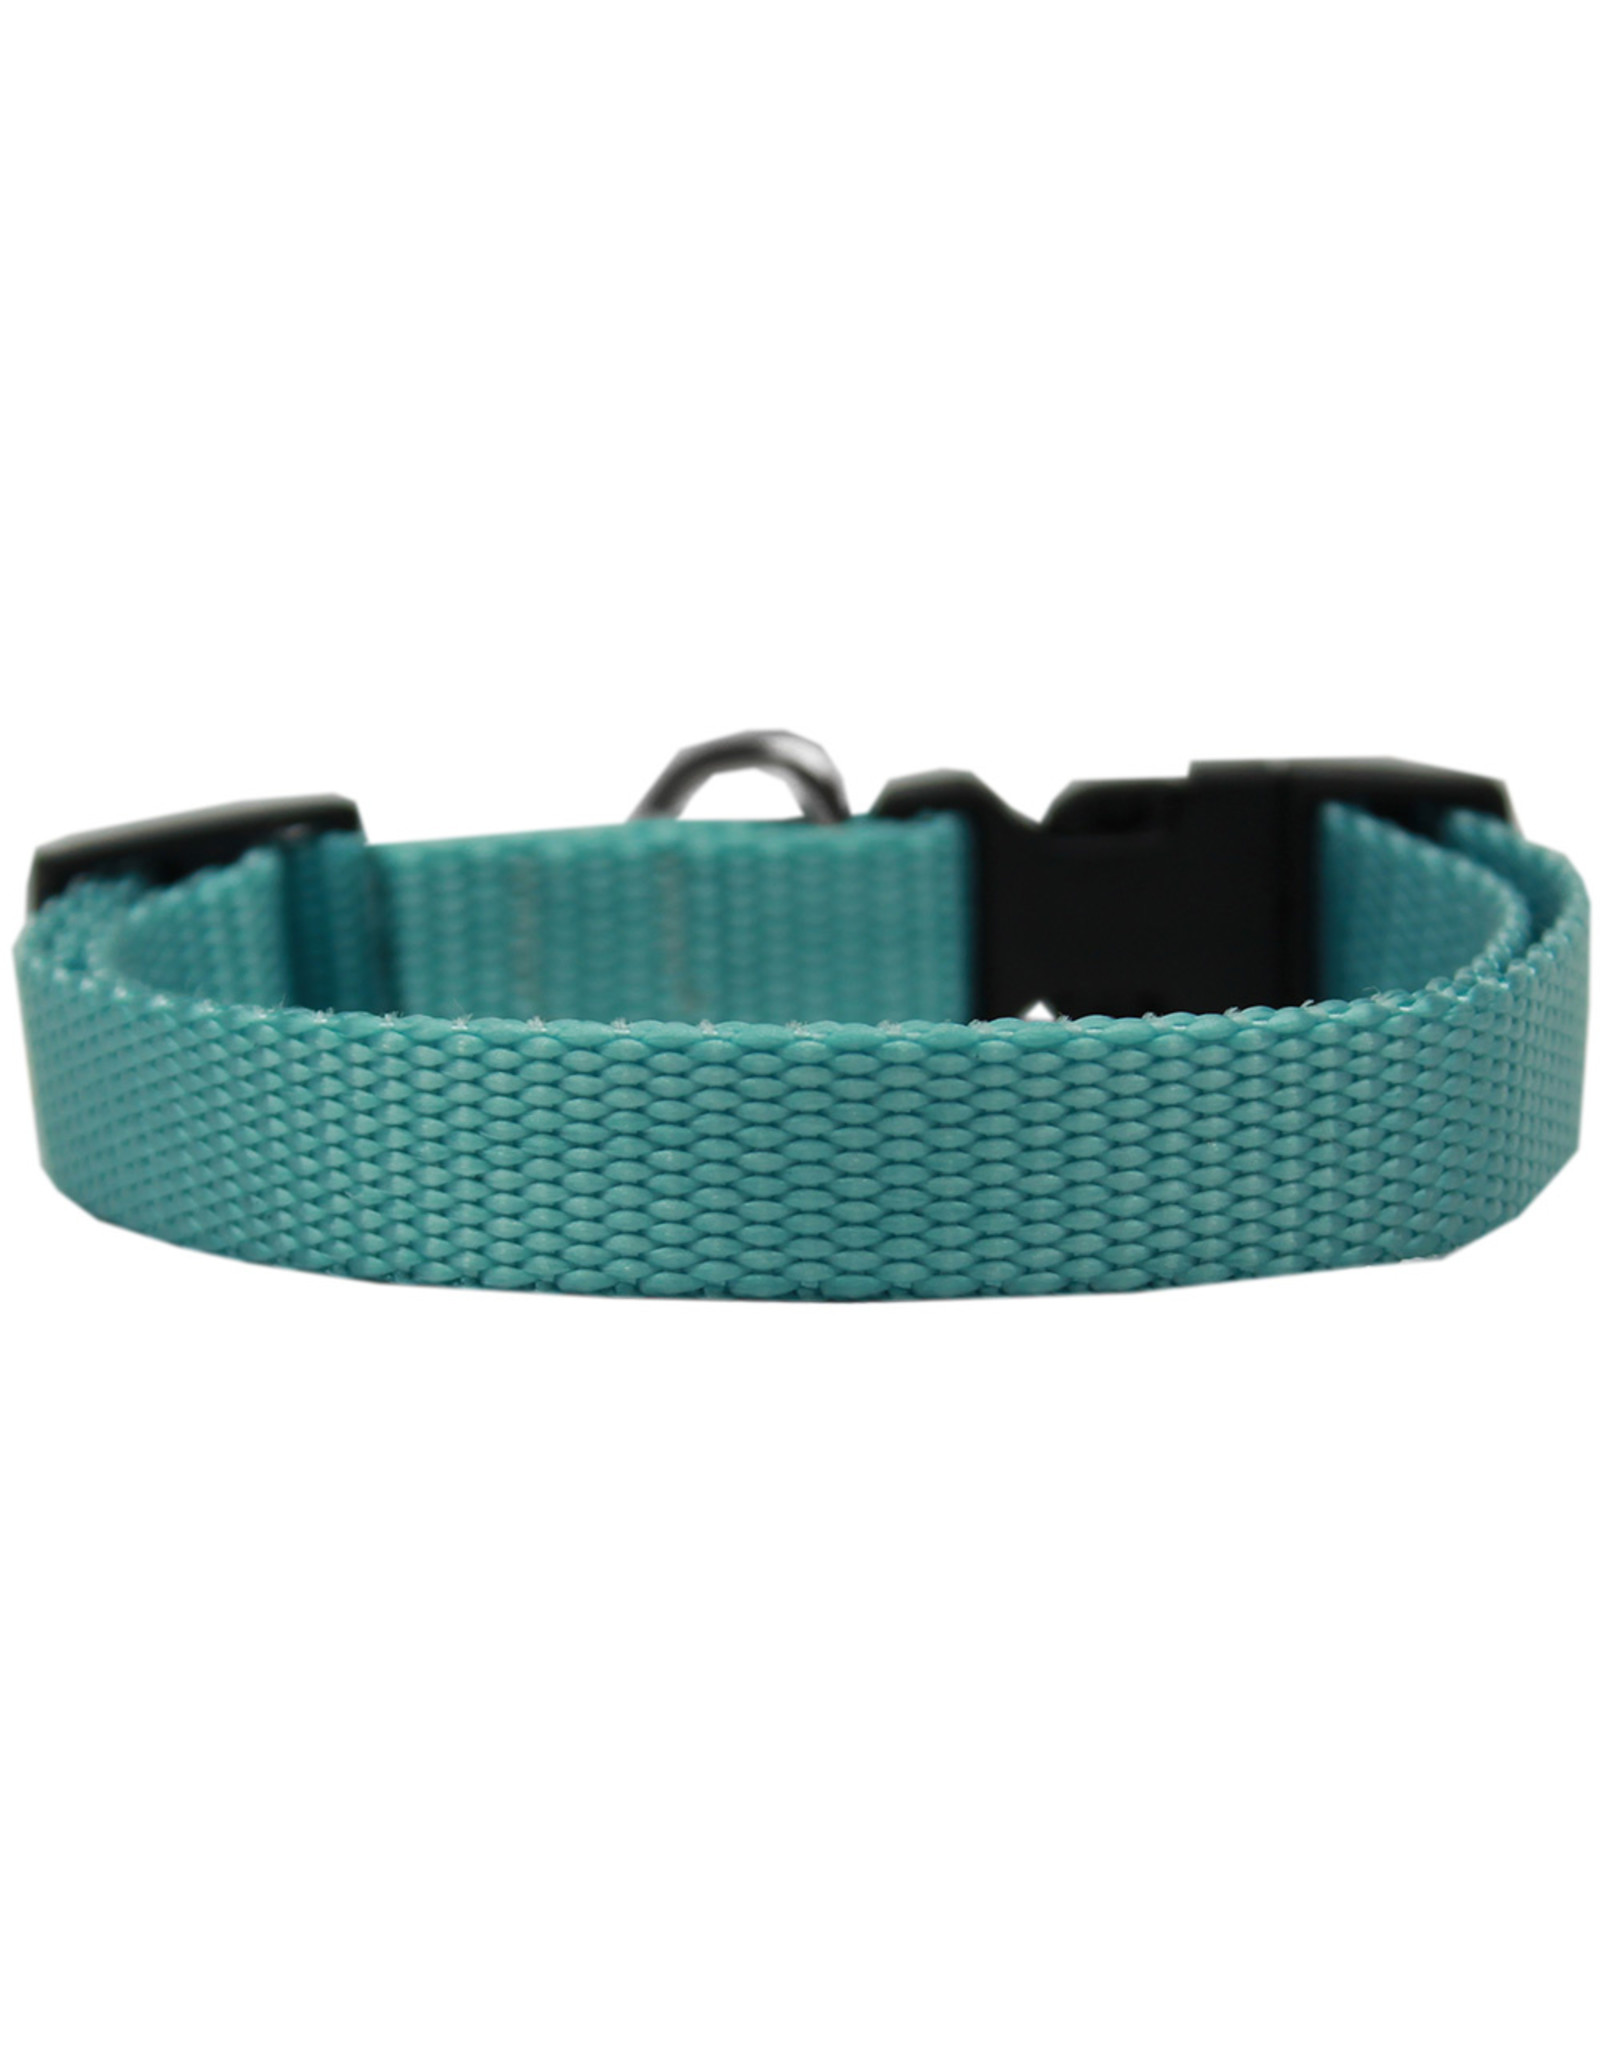 Mirage Pet Products MIRAGE PET PRODUCTS PLAIN DOG COLLAR